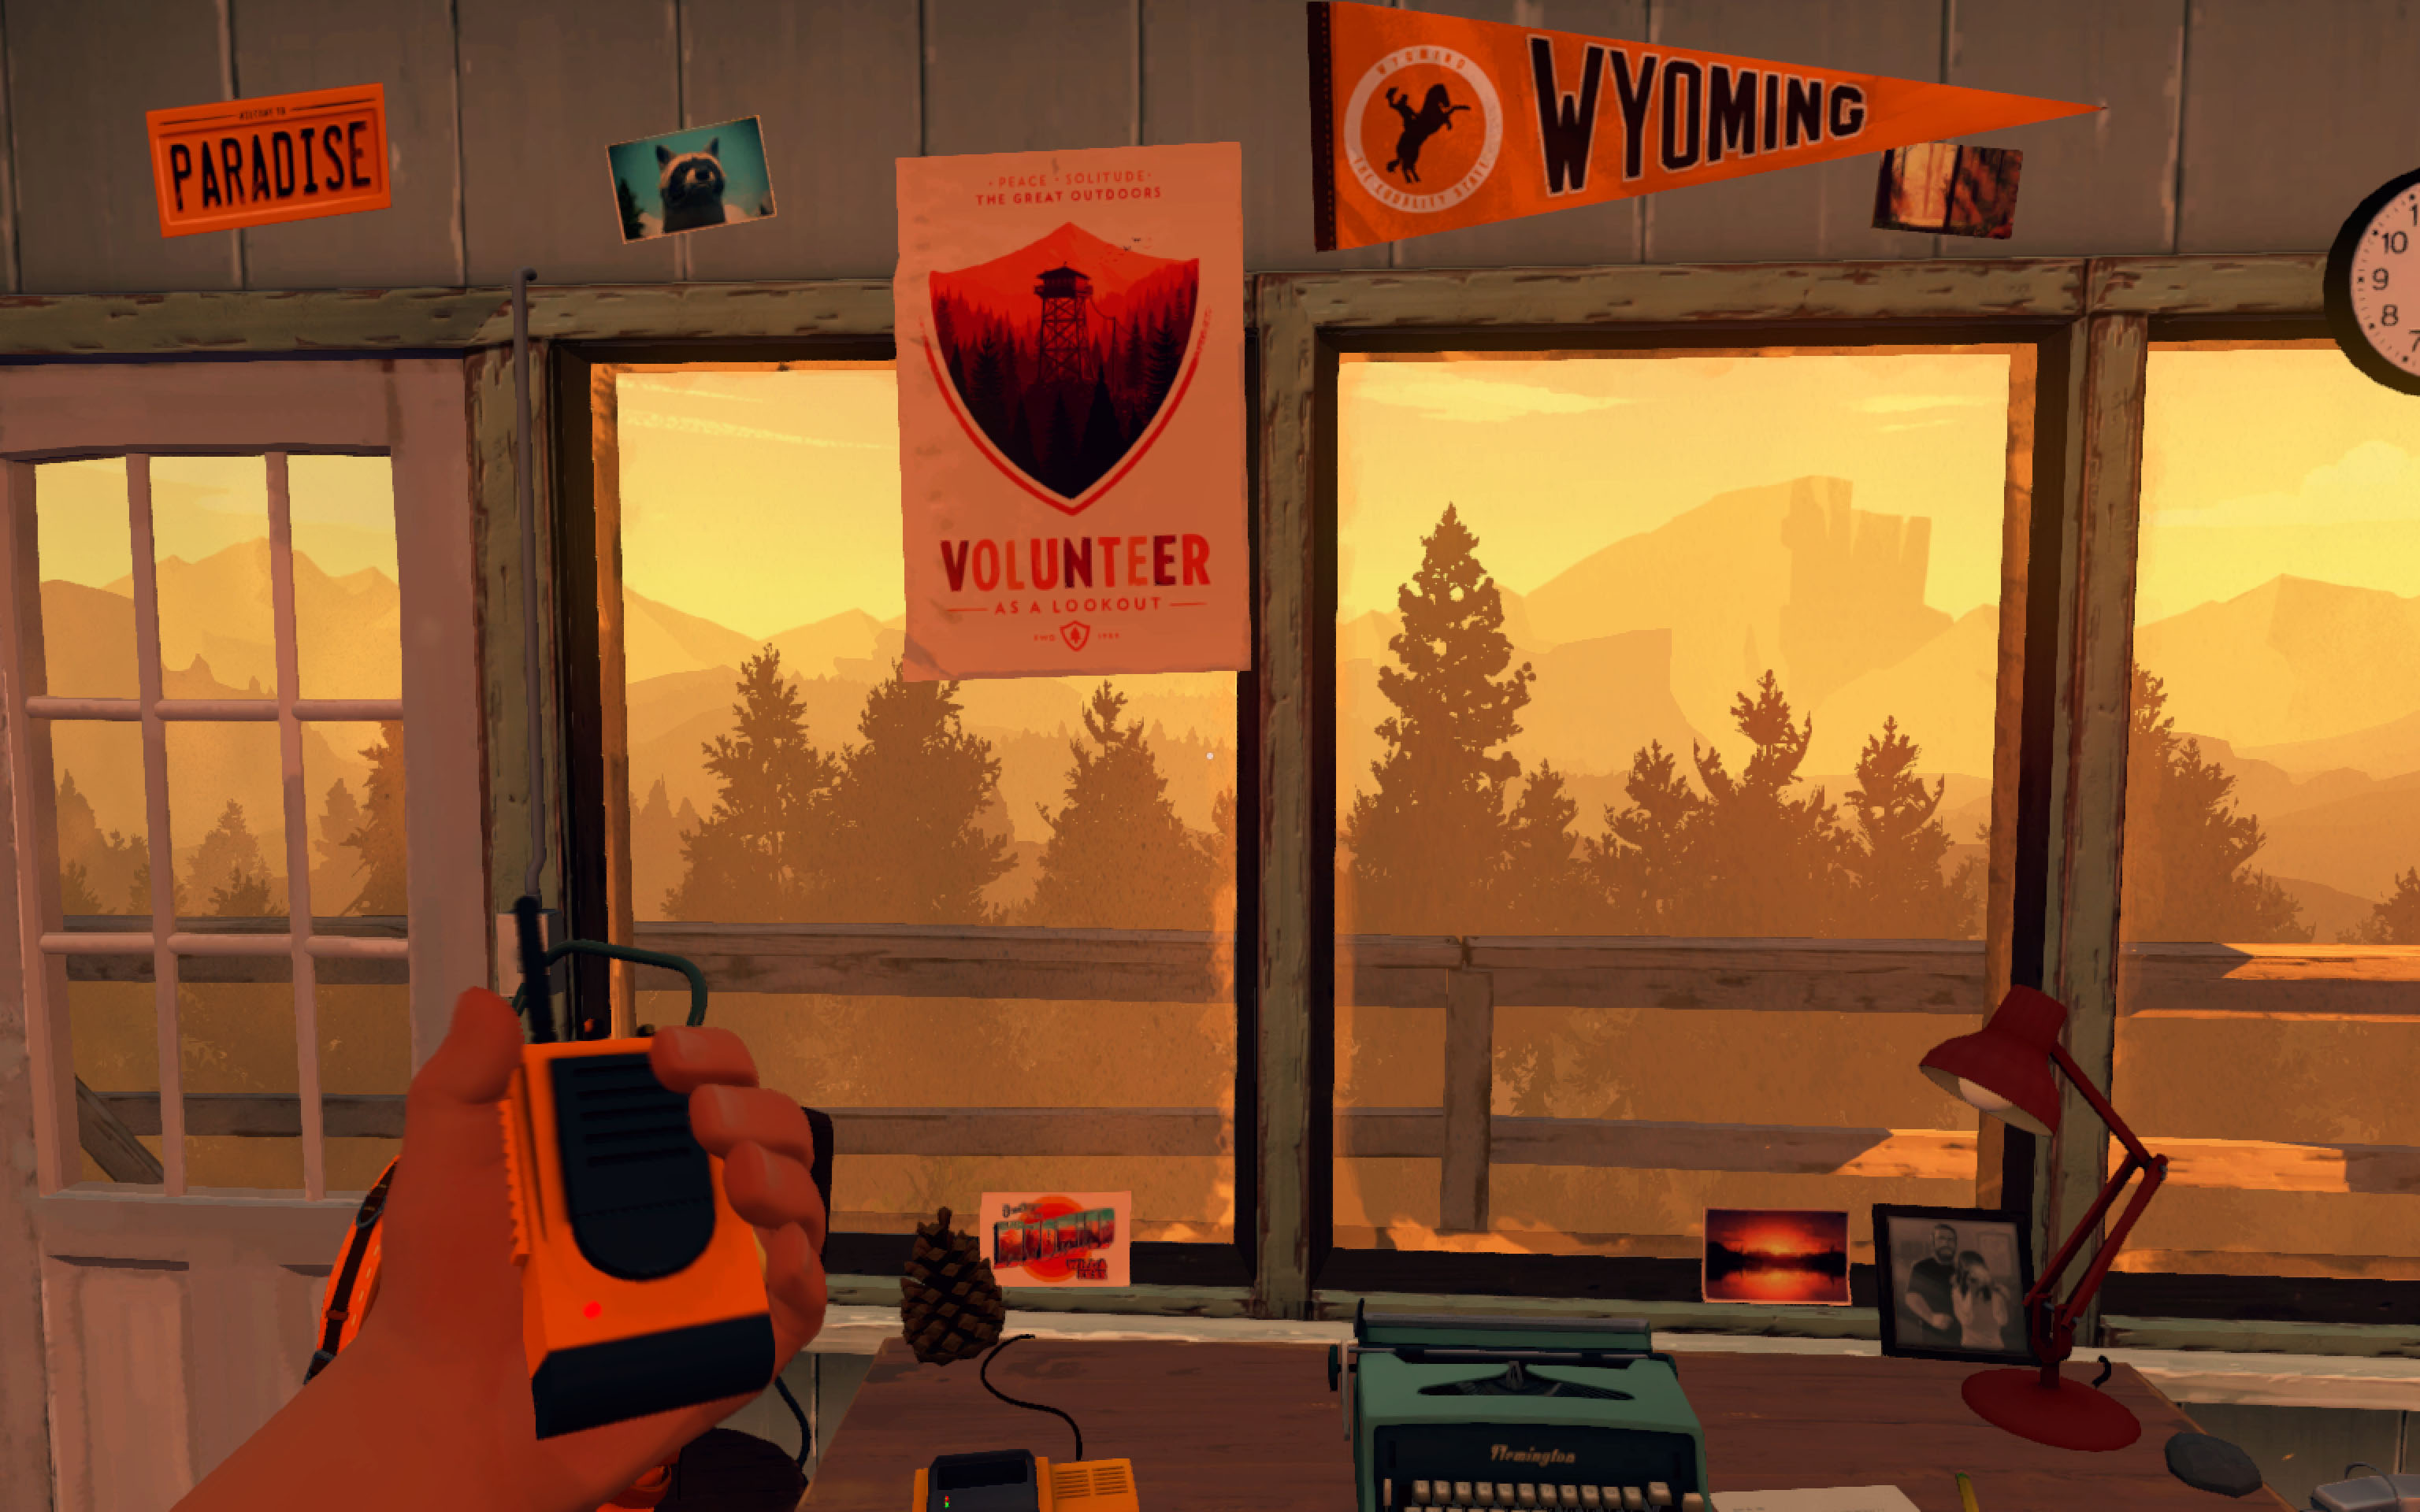 A first person view of a hand holding a yellow walkie talkie staring out at a lush forest in a watch tower cabin with Wyoming penants taped to the wall